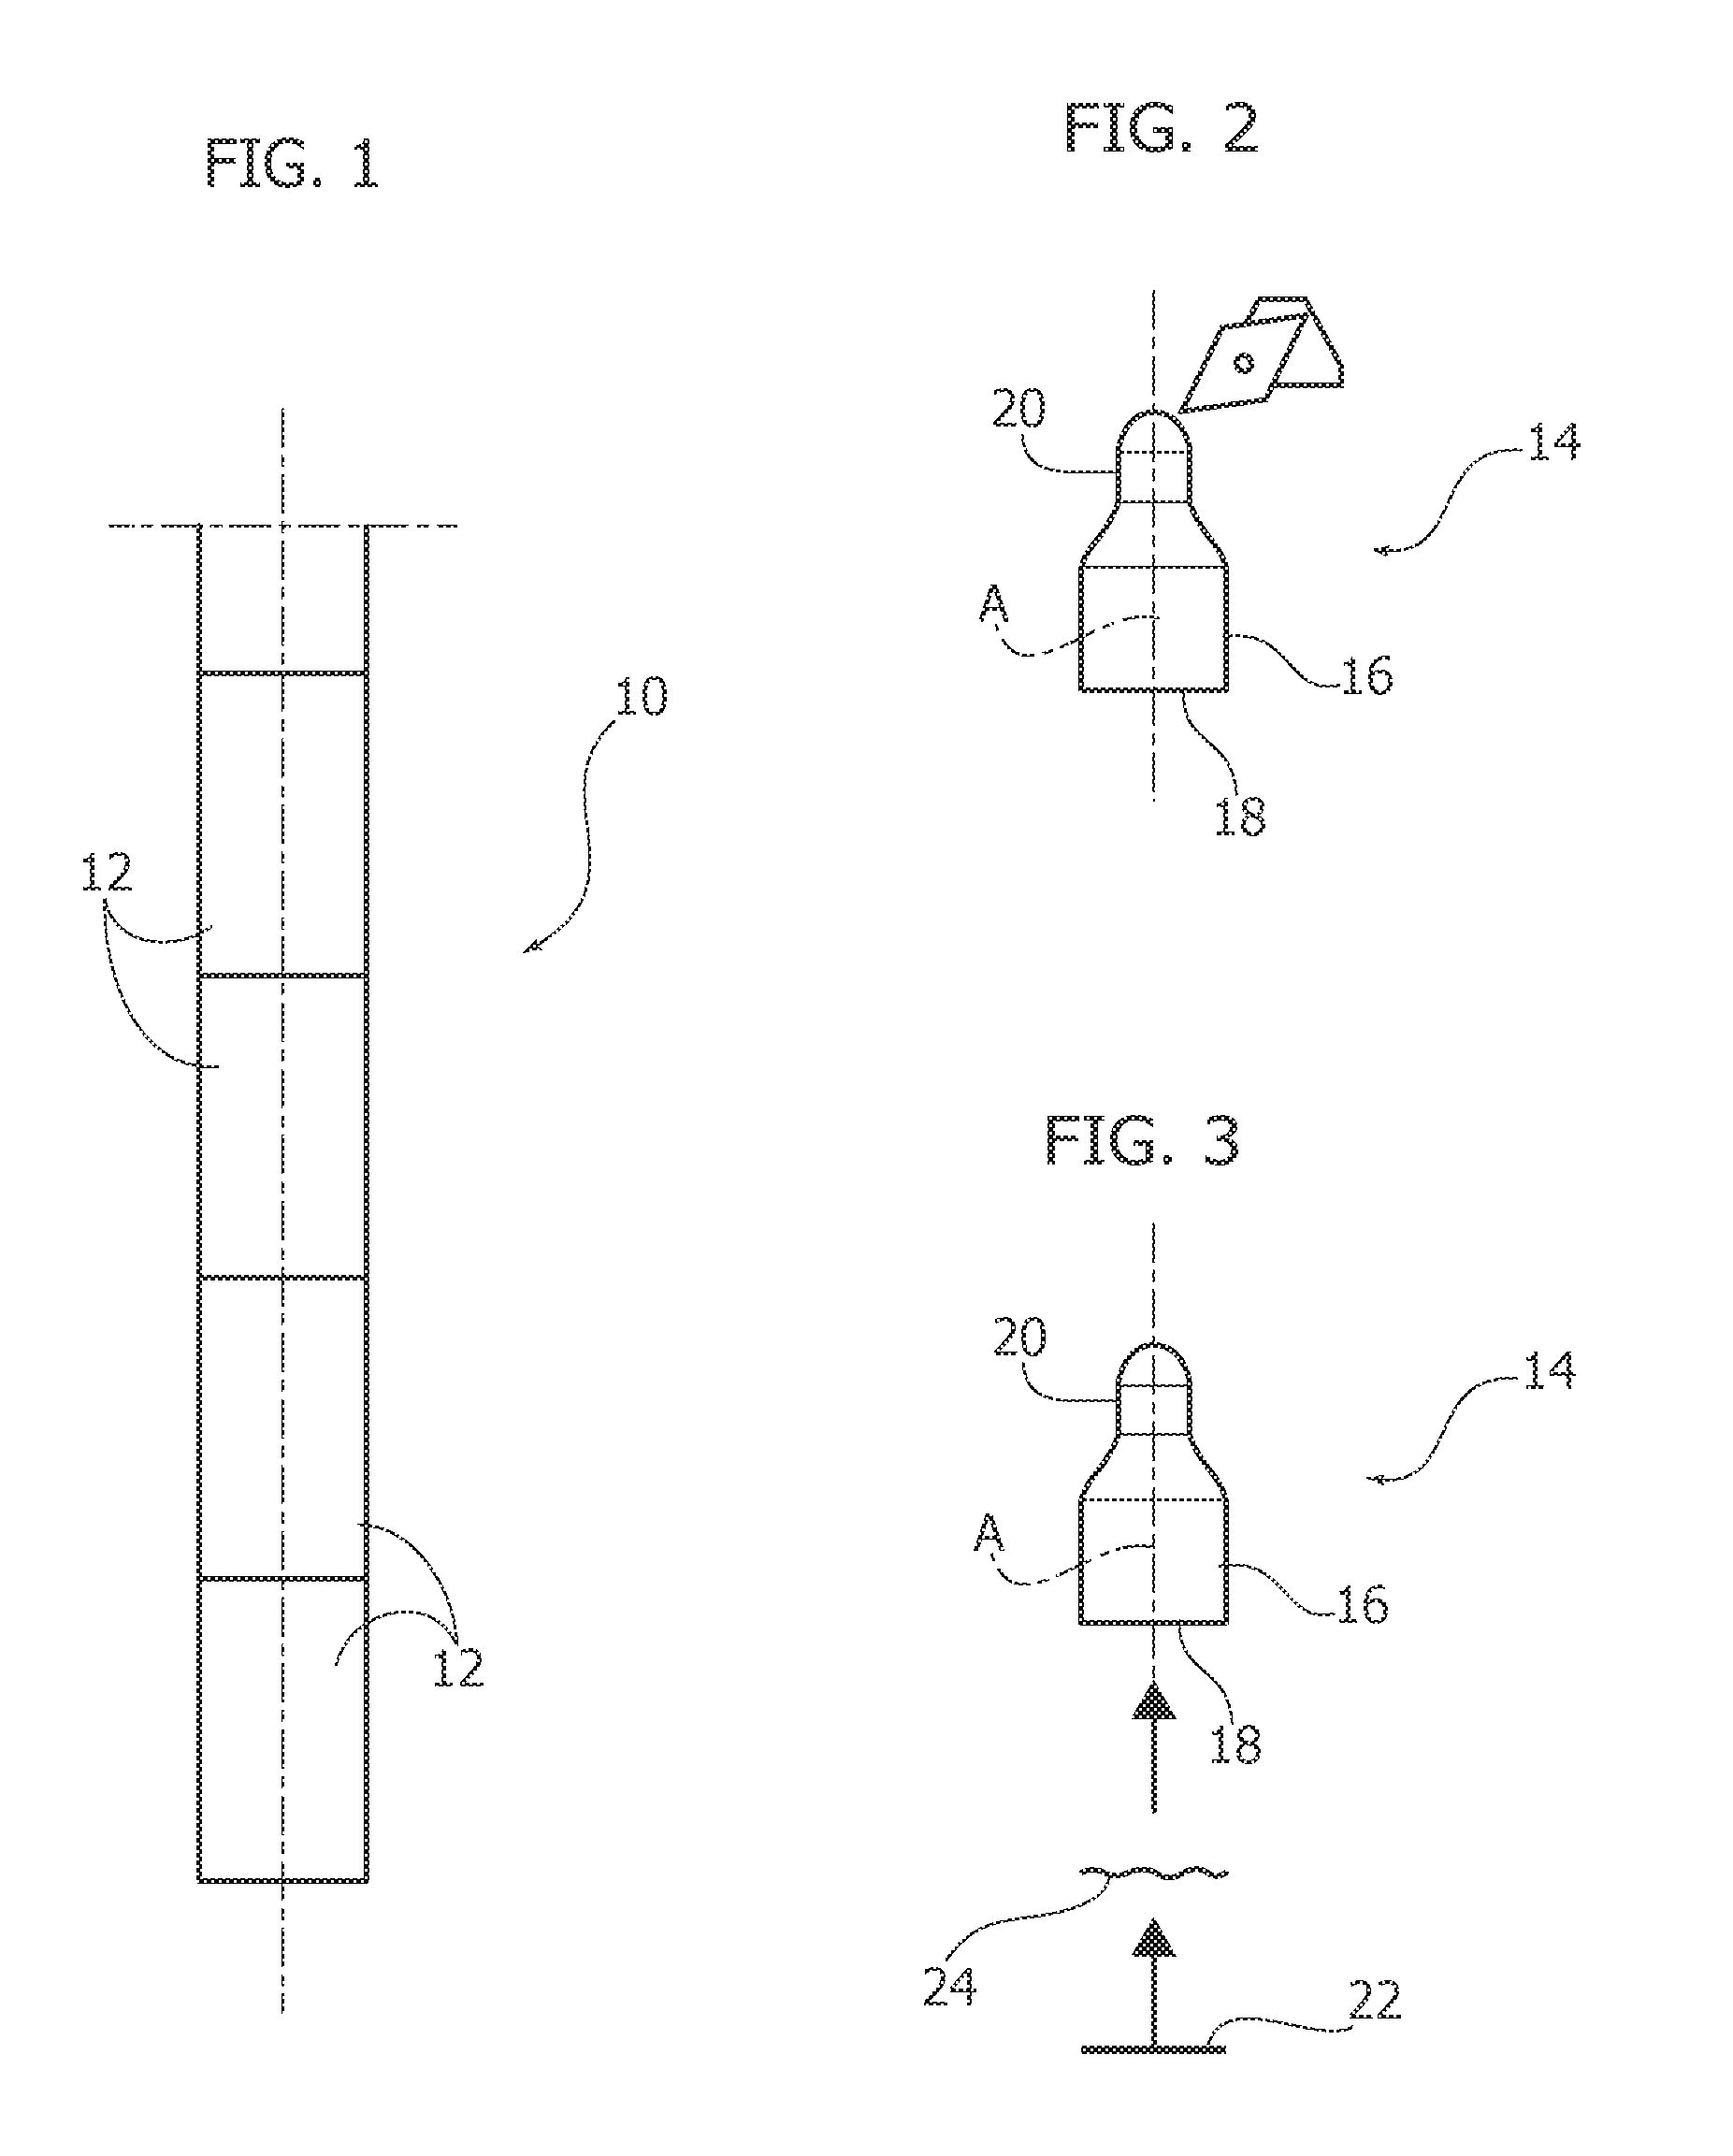 Method for producing a nozzle for injectors of internal combustion engines